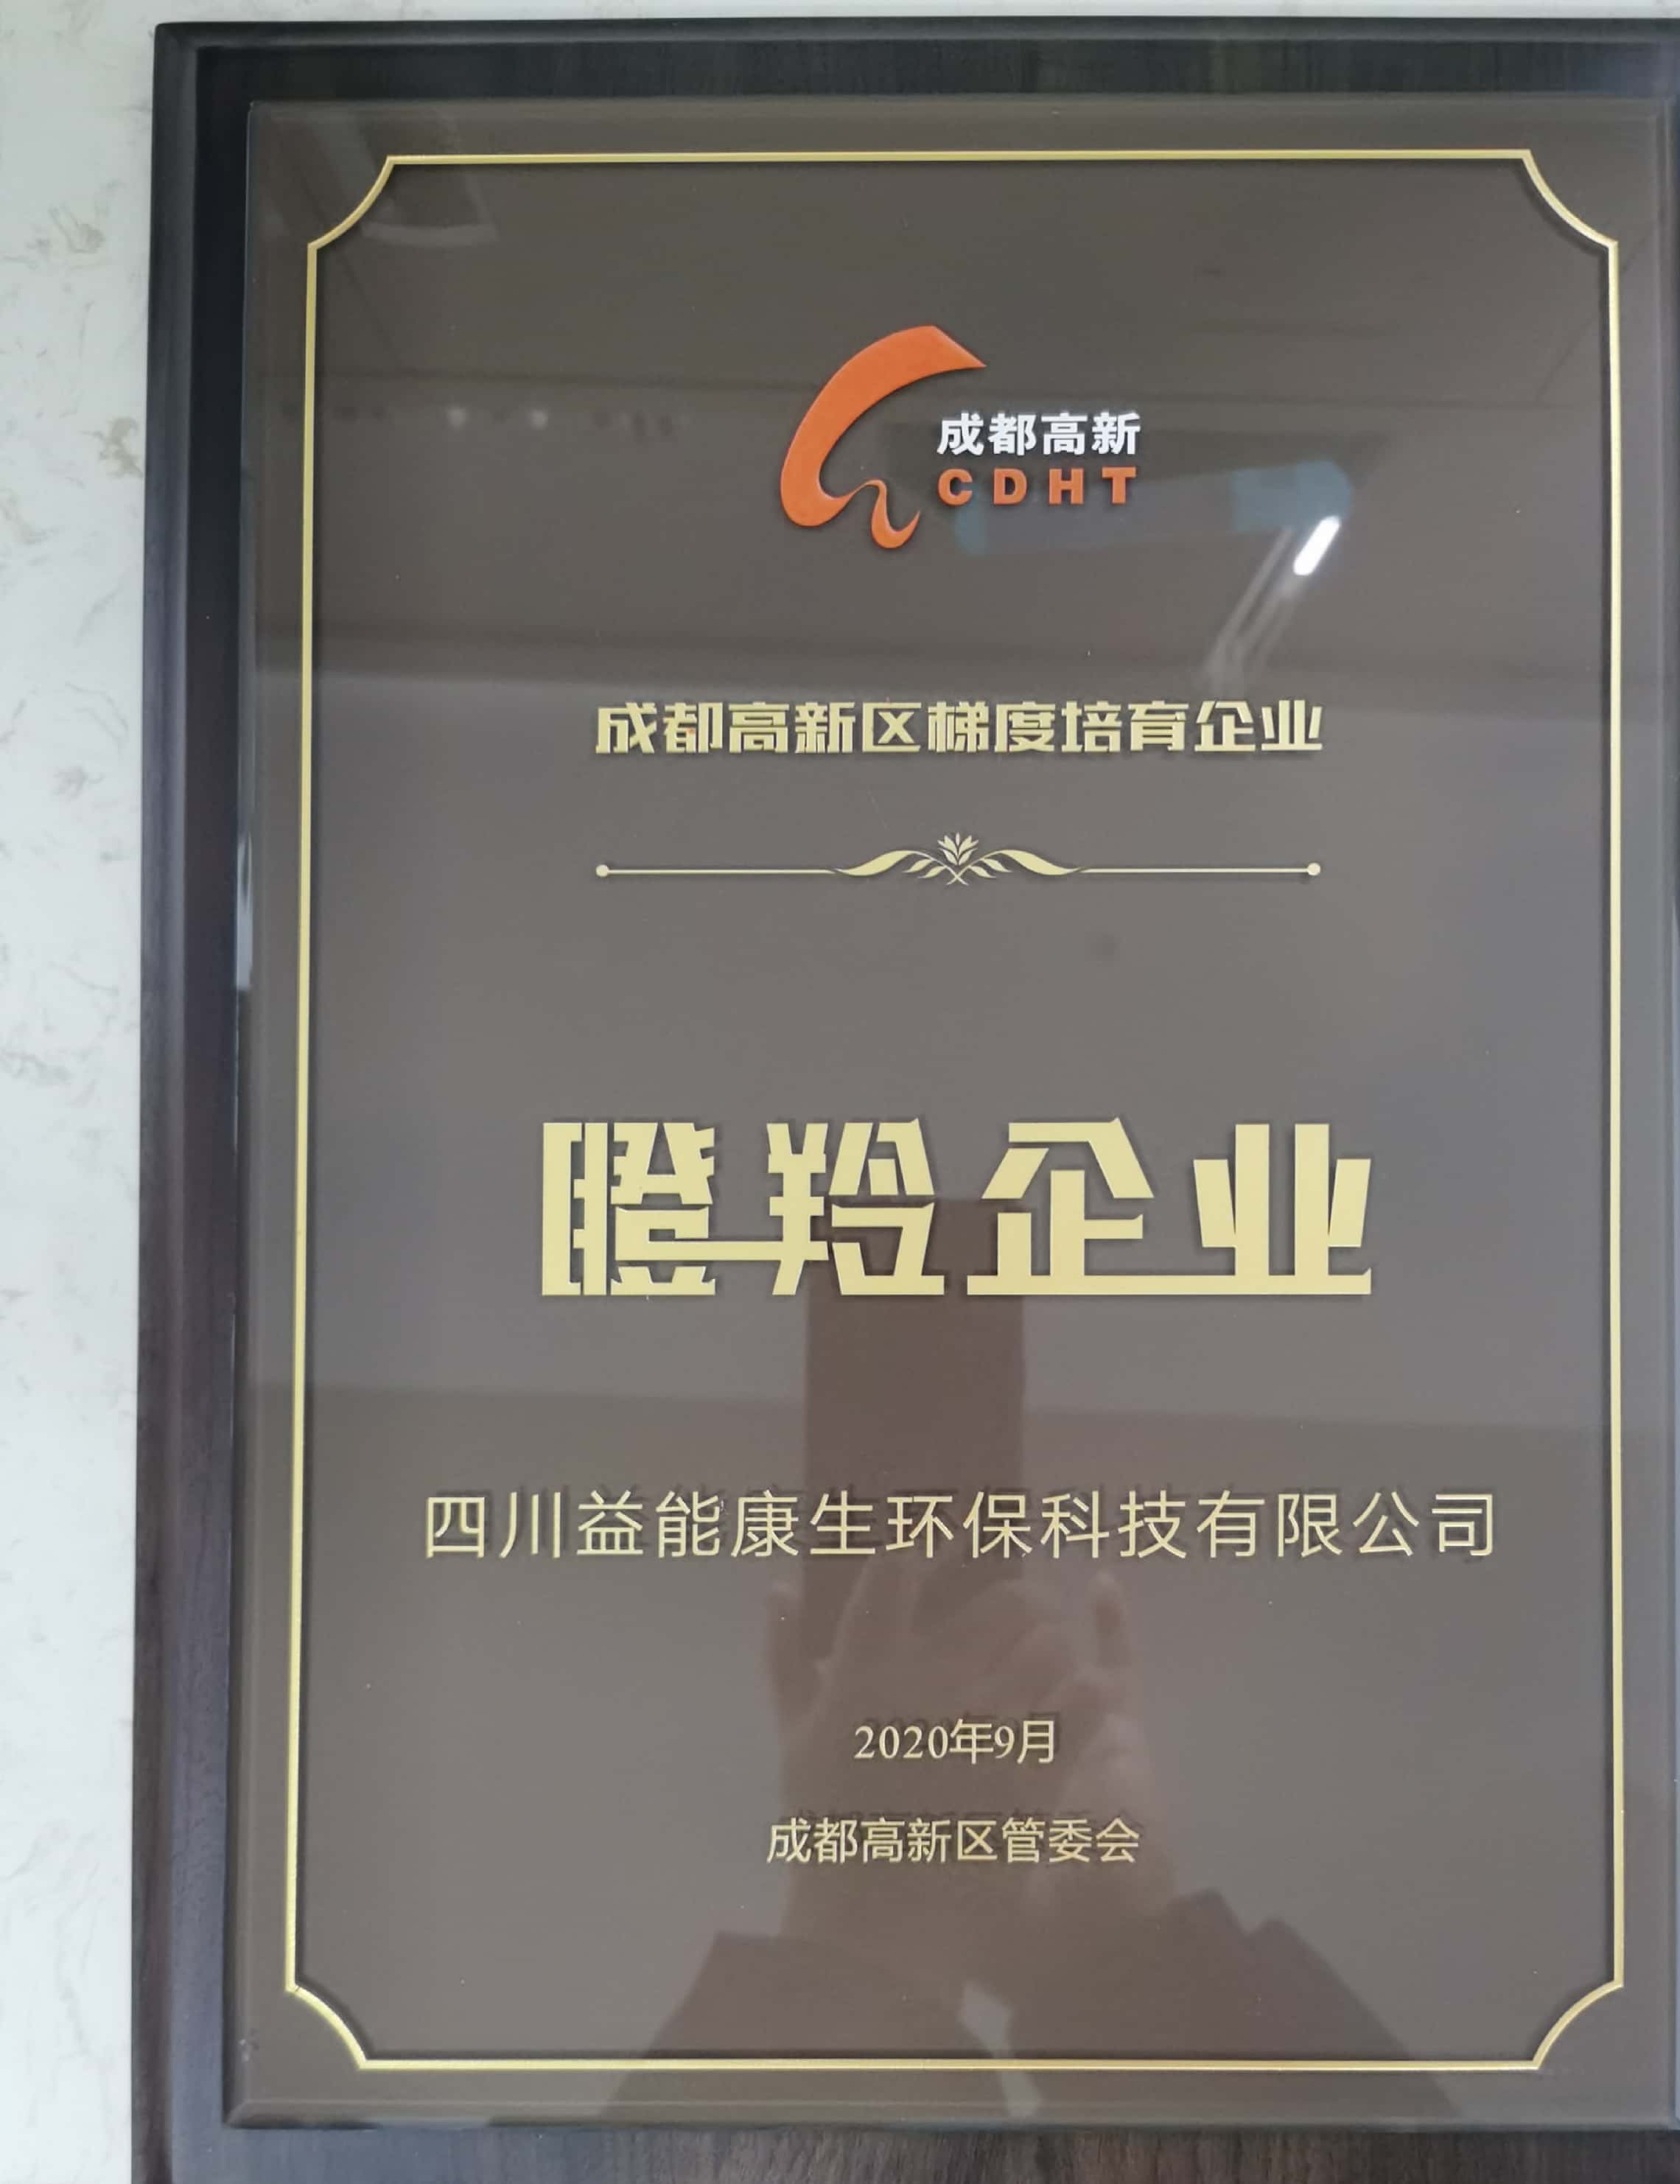 The company was awarded the title of Chengdu High-tech District Gazelle Enterprise